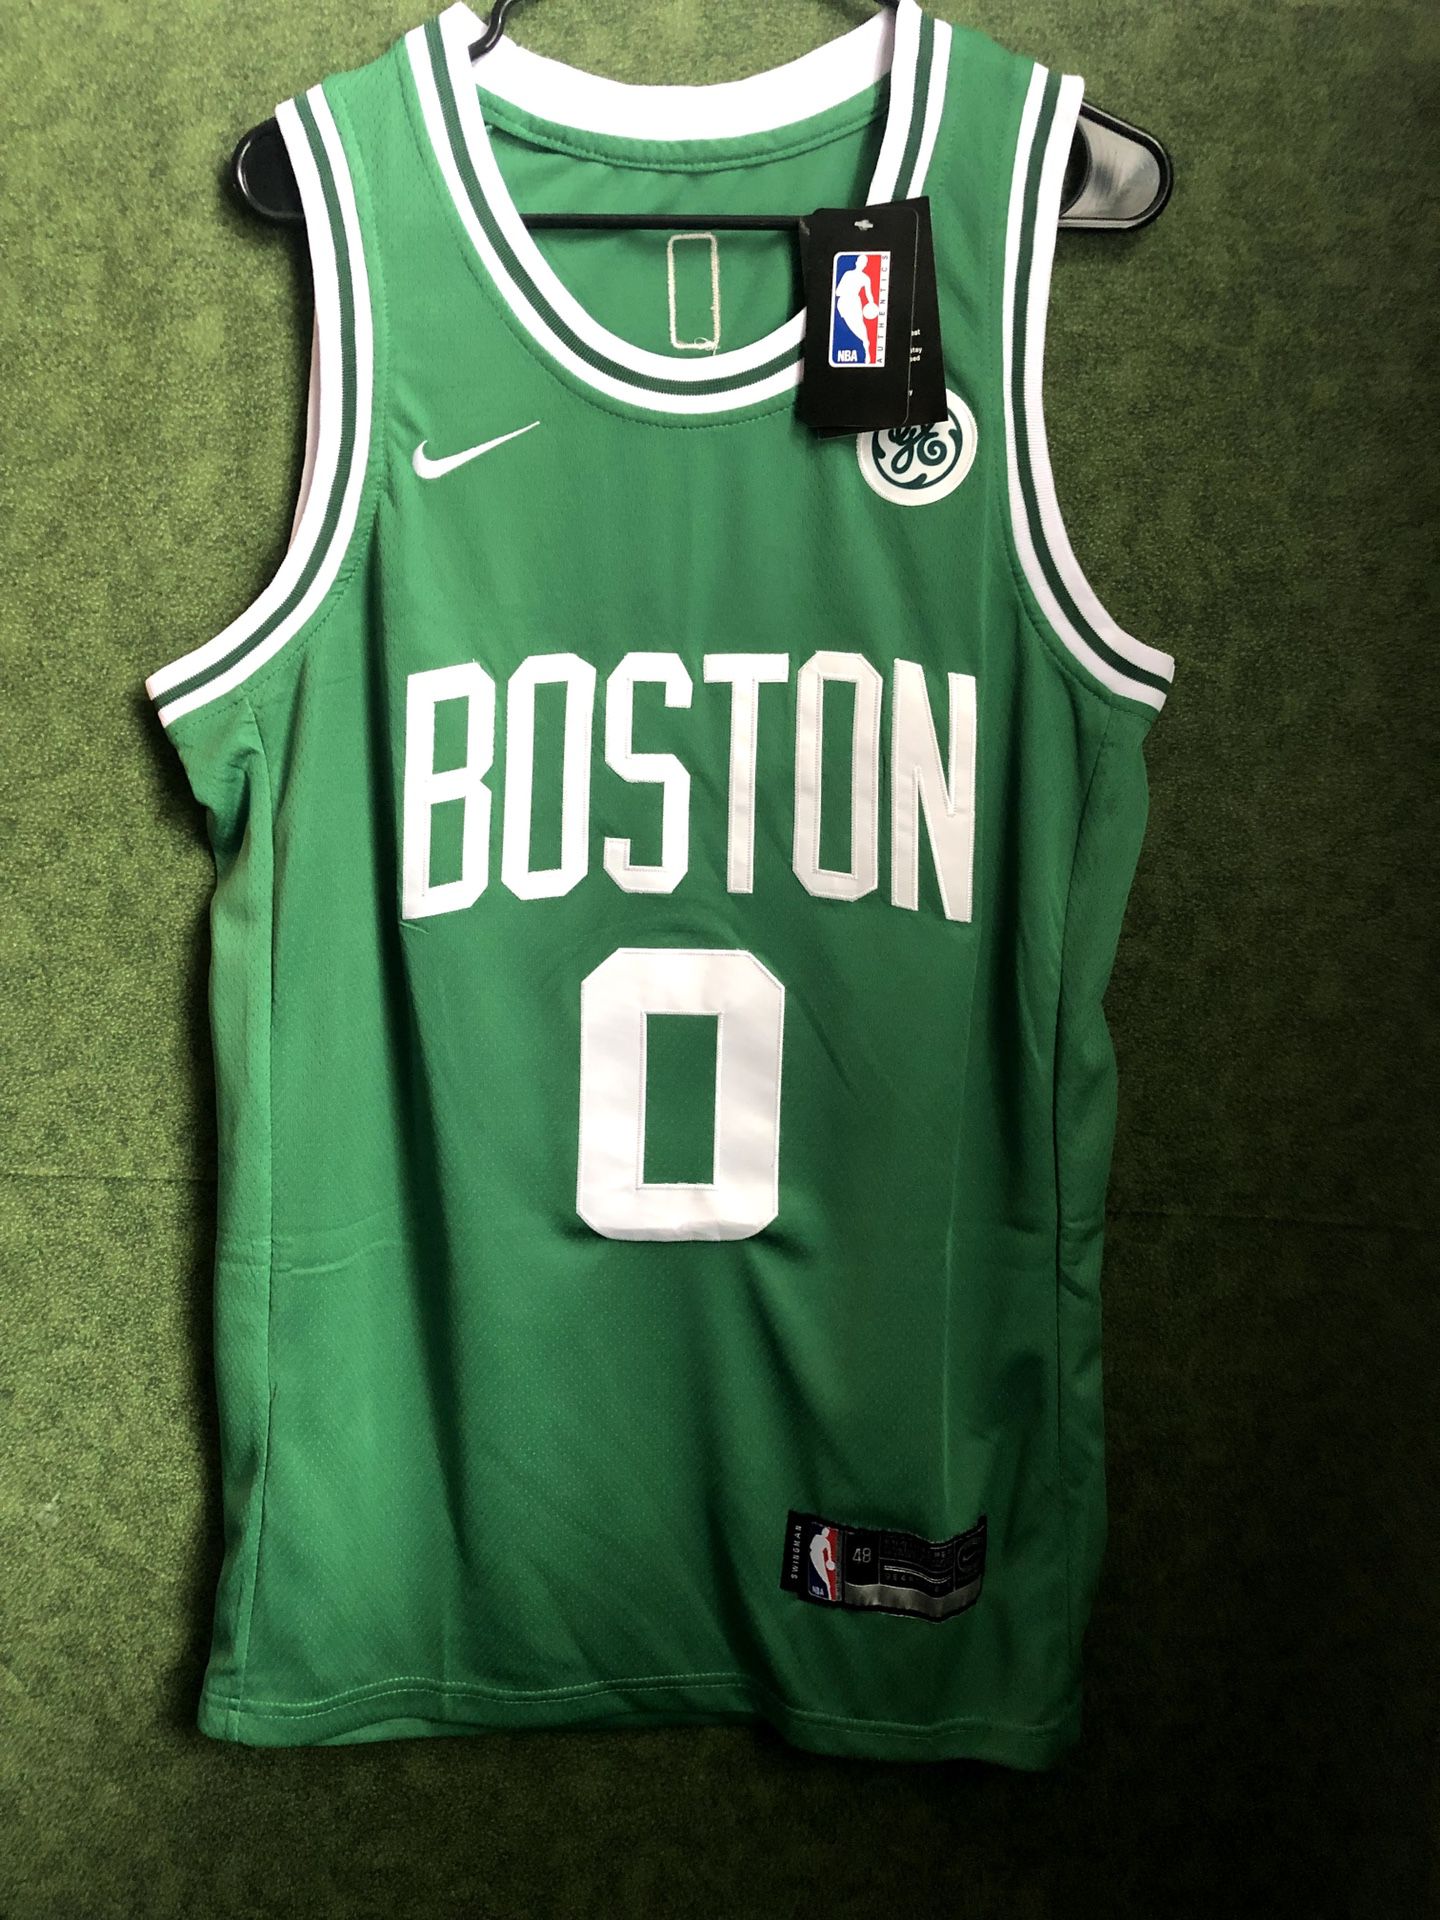 JAYSON TATUM BOSTON CELTICS NIKE JERSEY BRAND NEW WITH TAGS SIZES LARGE AND XL AVAILABLE